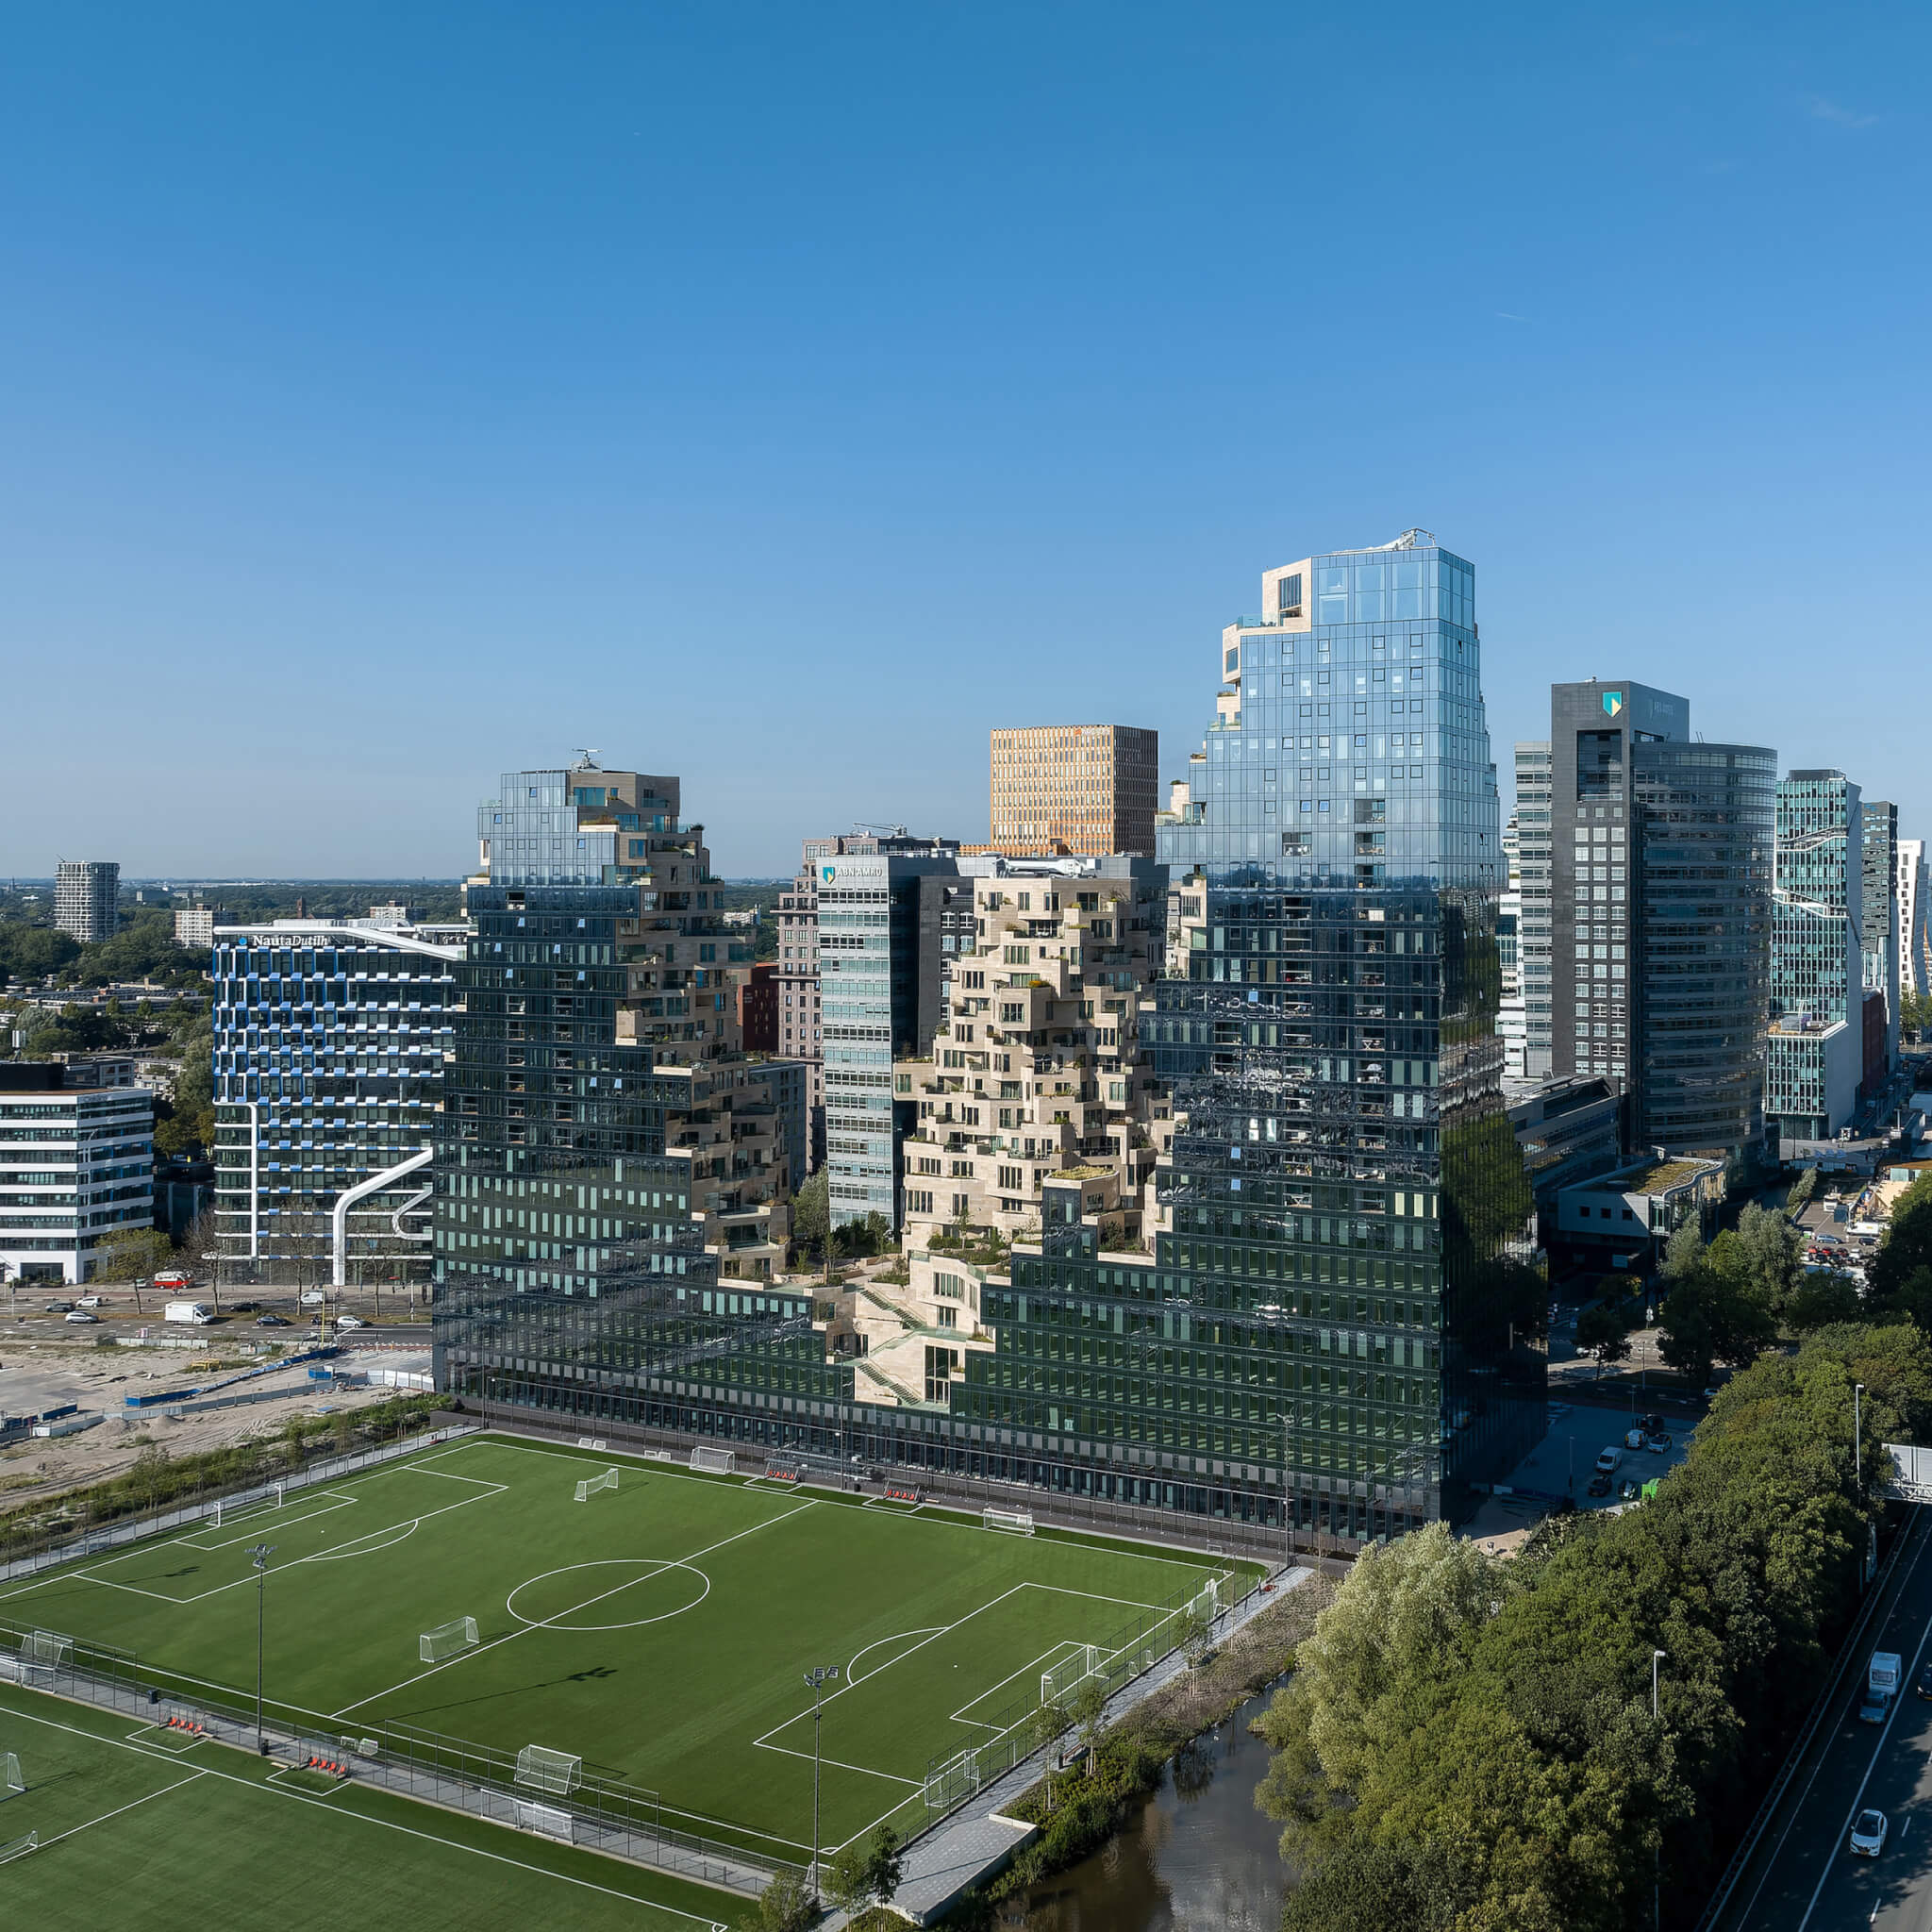 MVRDV debuts Valley, a mixed-use complex in Amsterdam’s Zuidas district